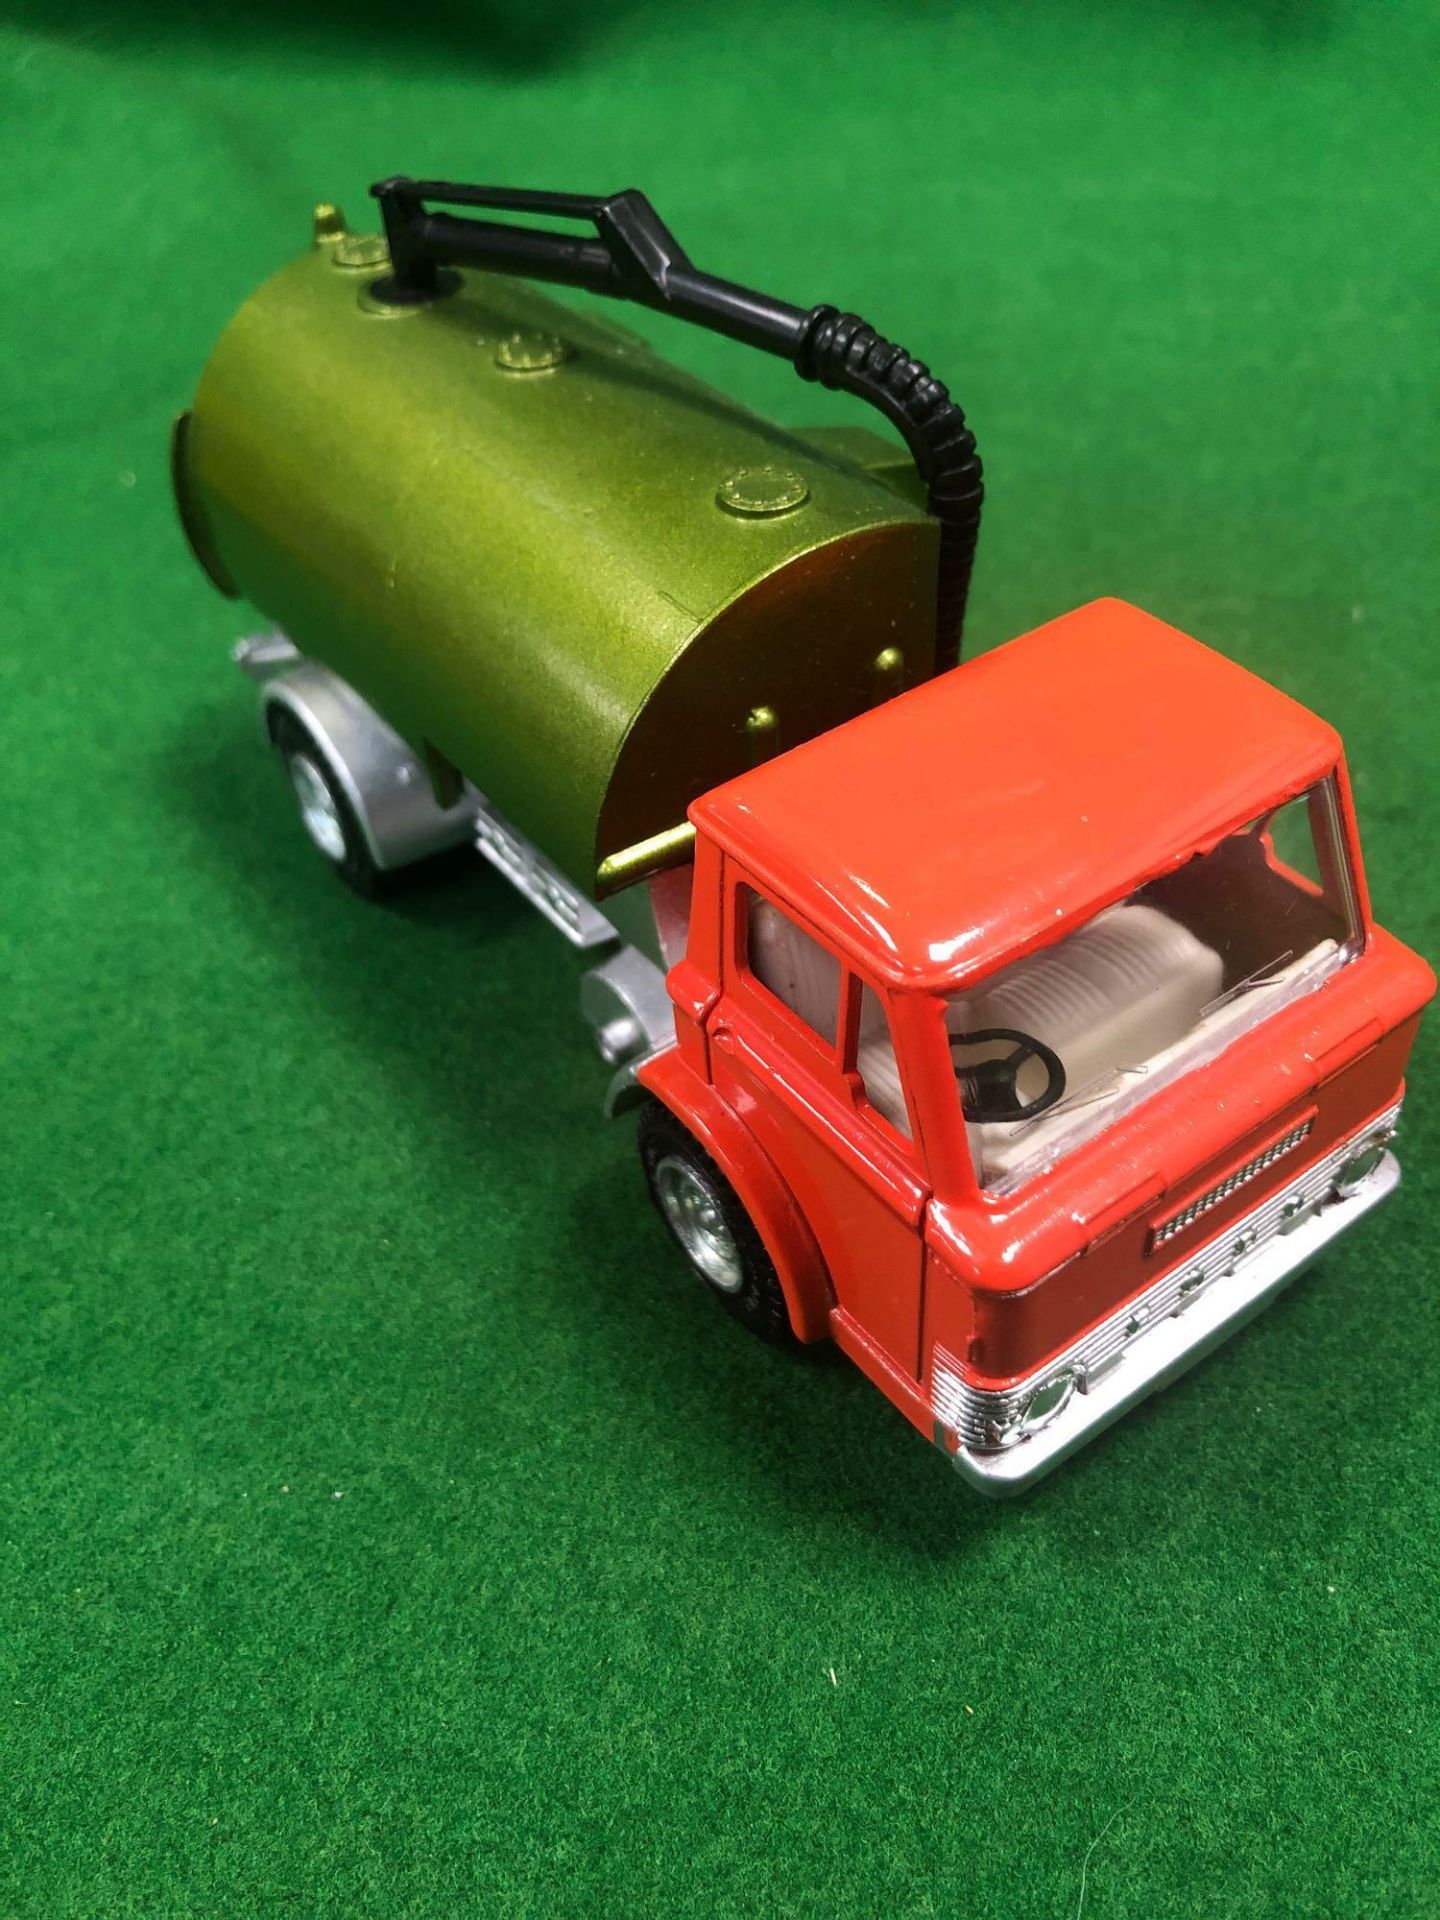 Superb Mint Dinky Toys Diecast #451 Johnston Road Sweeper In Excellent Box - Image 2 of 3